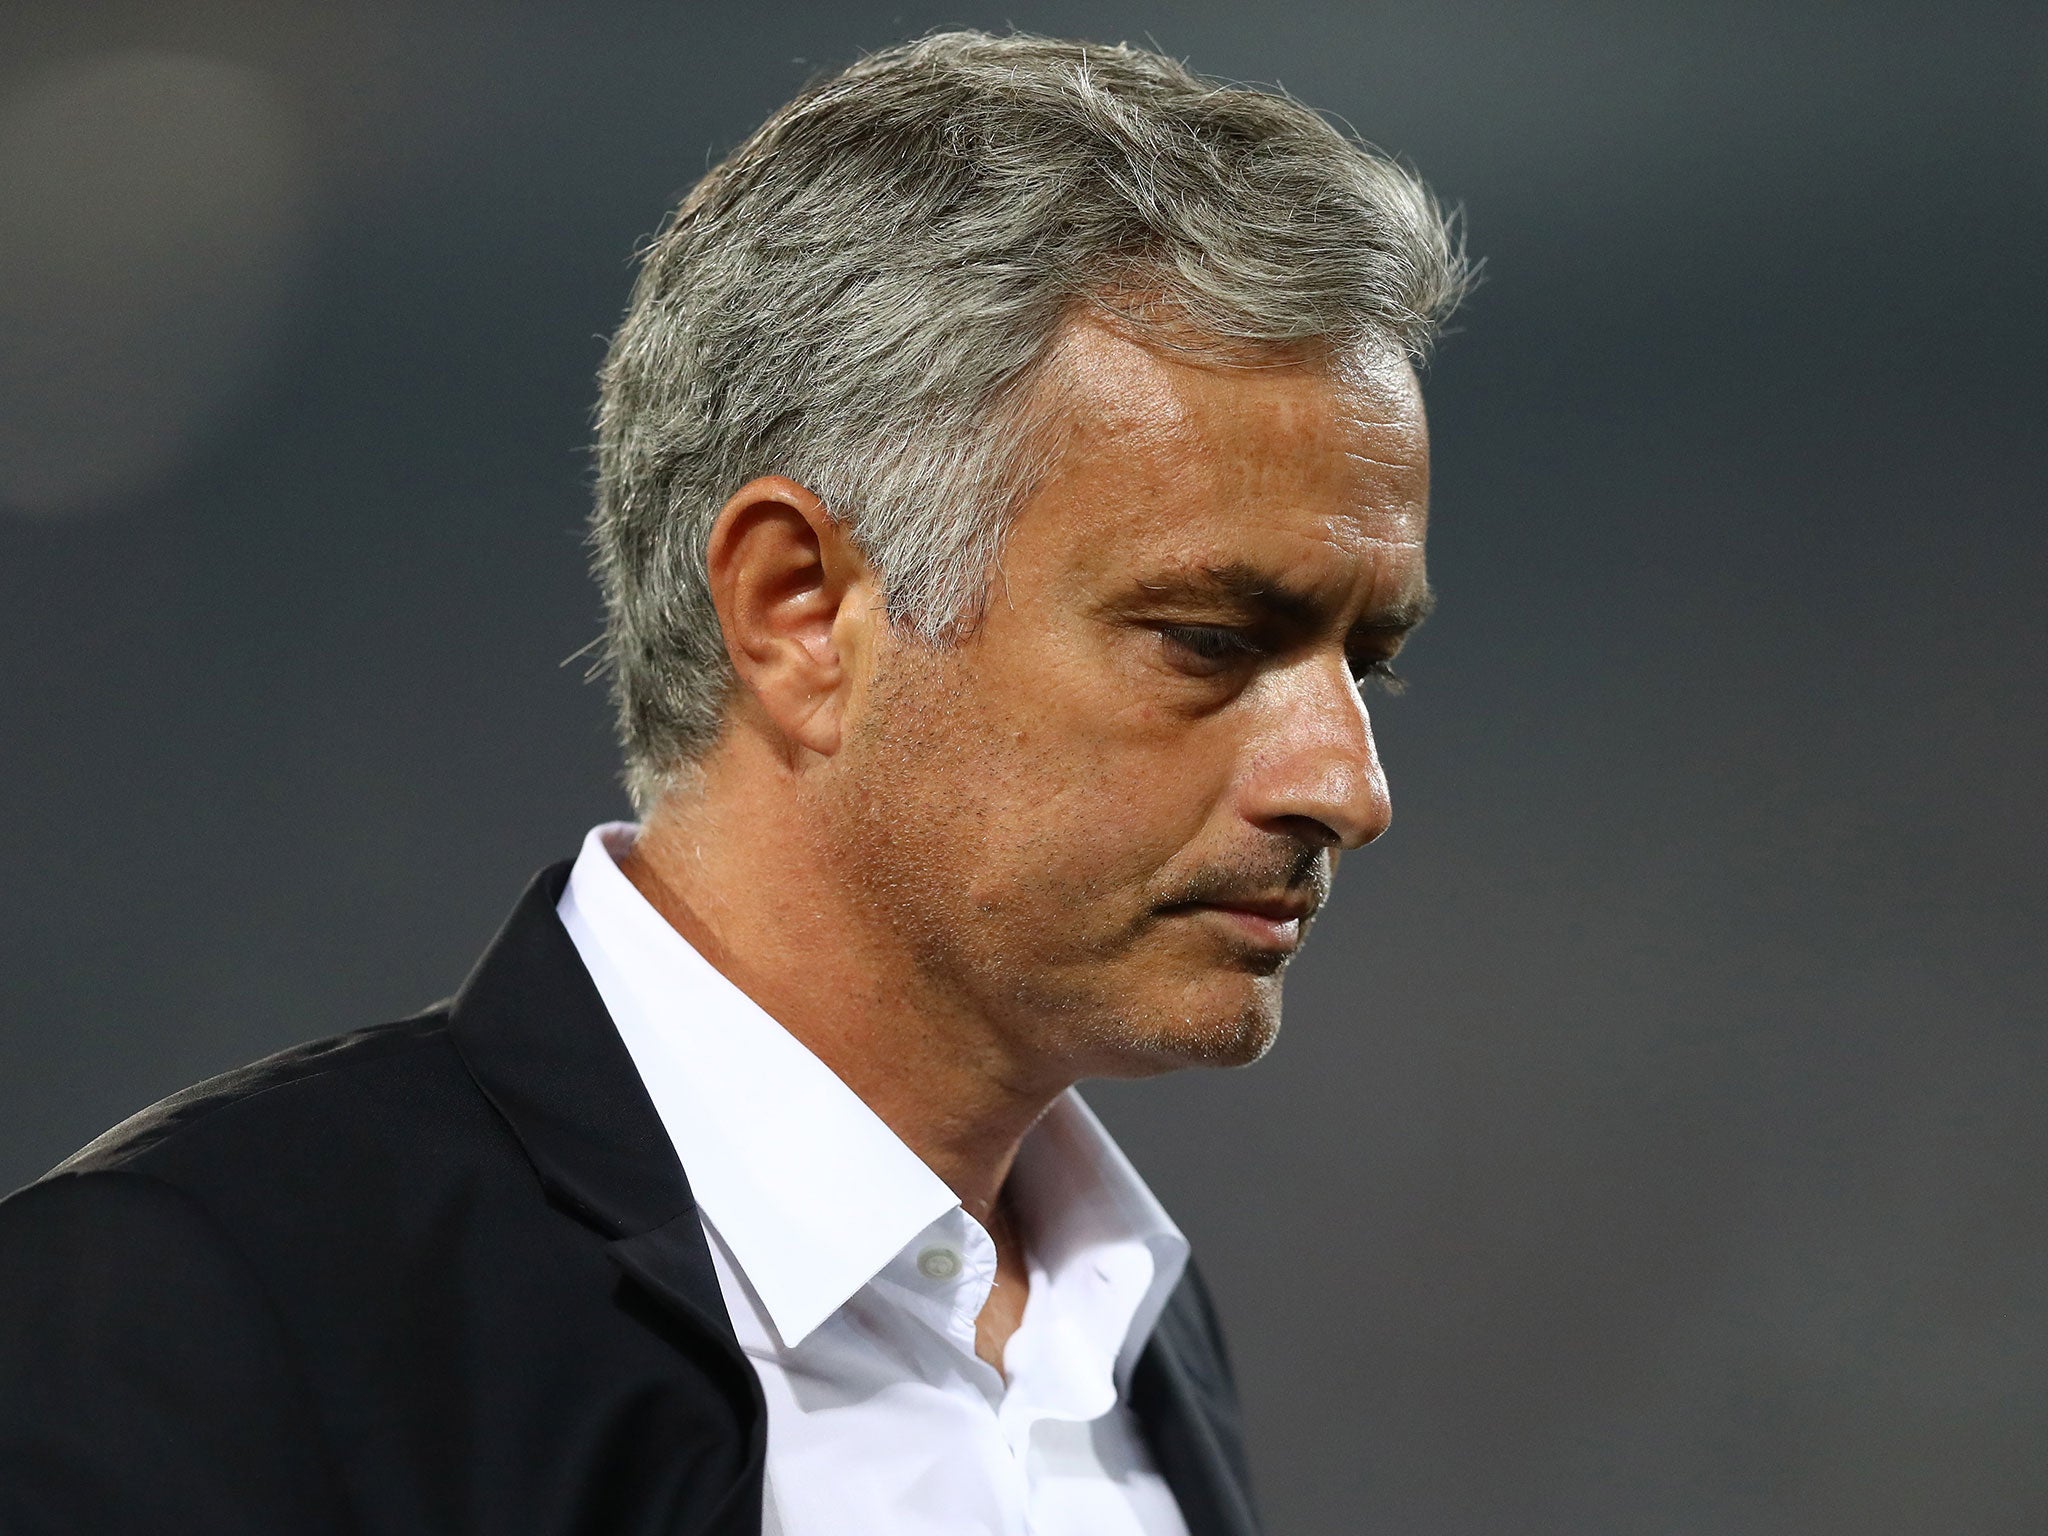 Jose Mourinho has attempted to diffuse the tense atmosphere surrounding the game